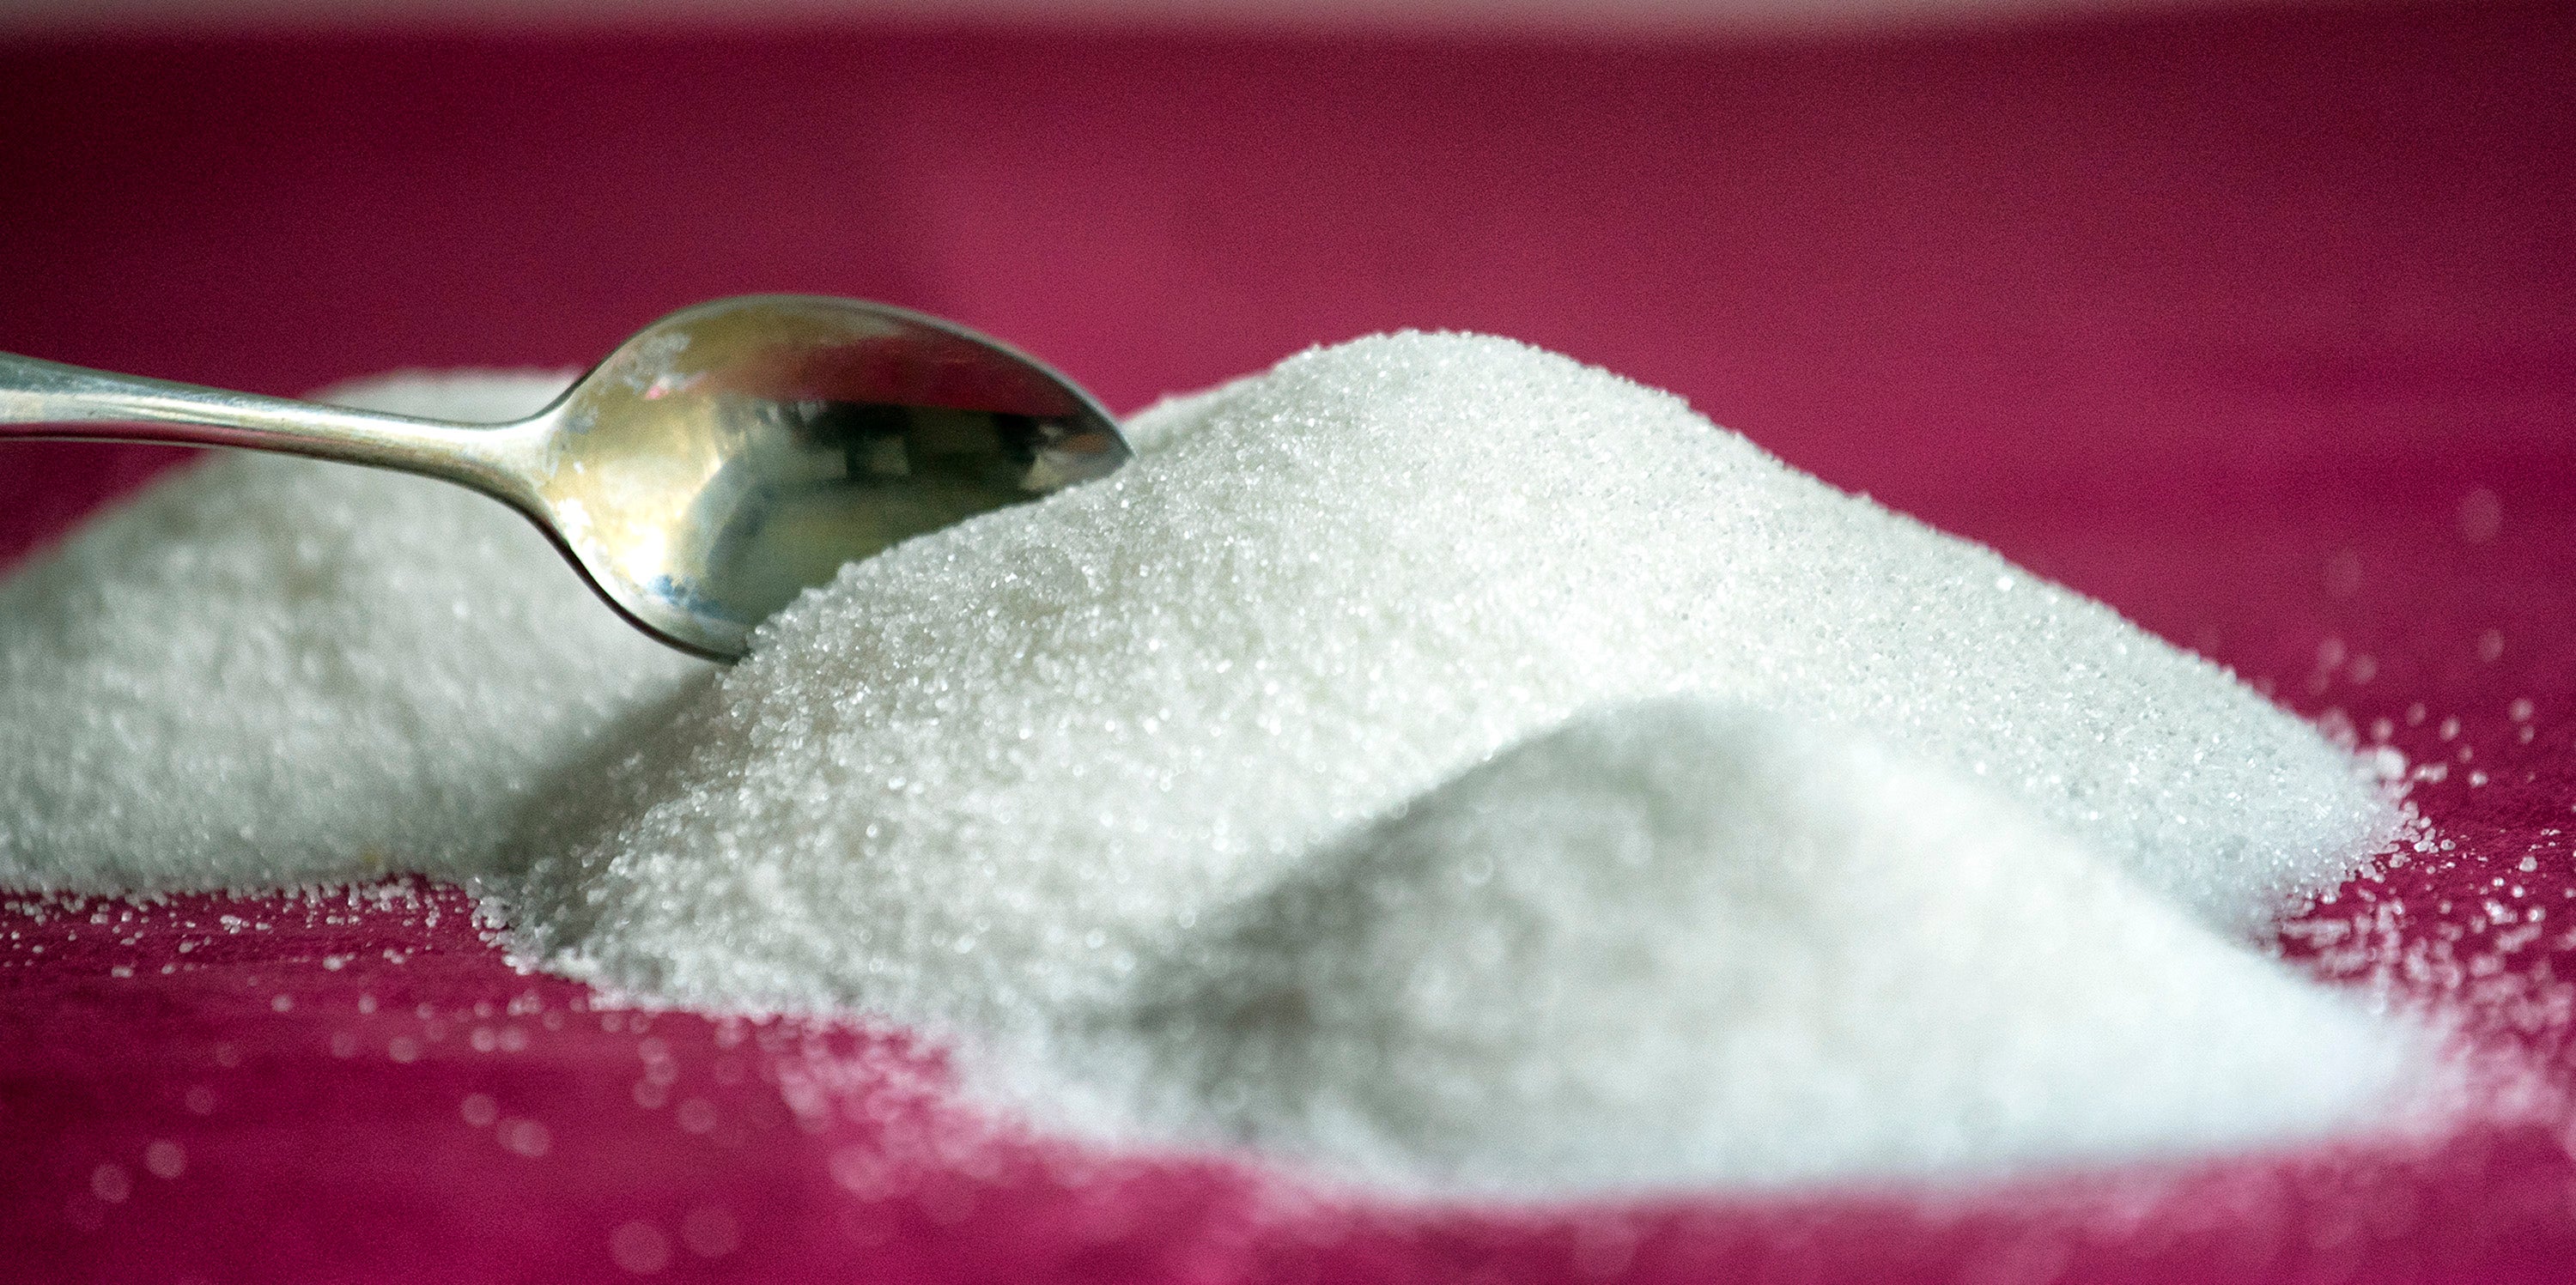 Supermarkets could end up paying more for sugar